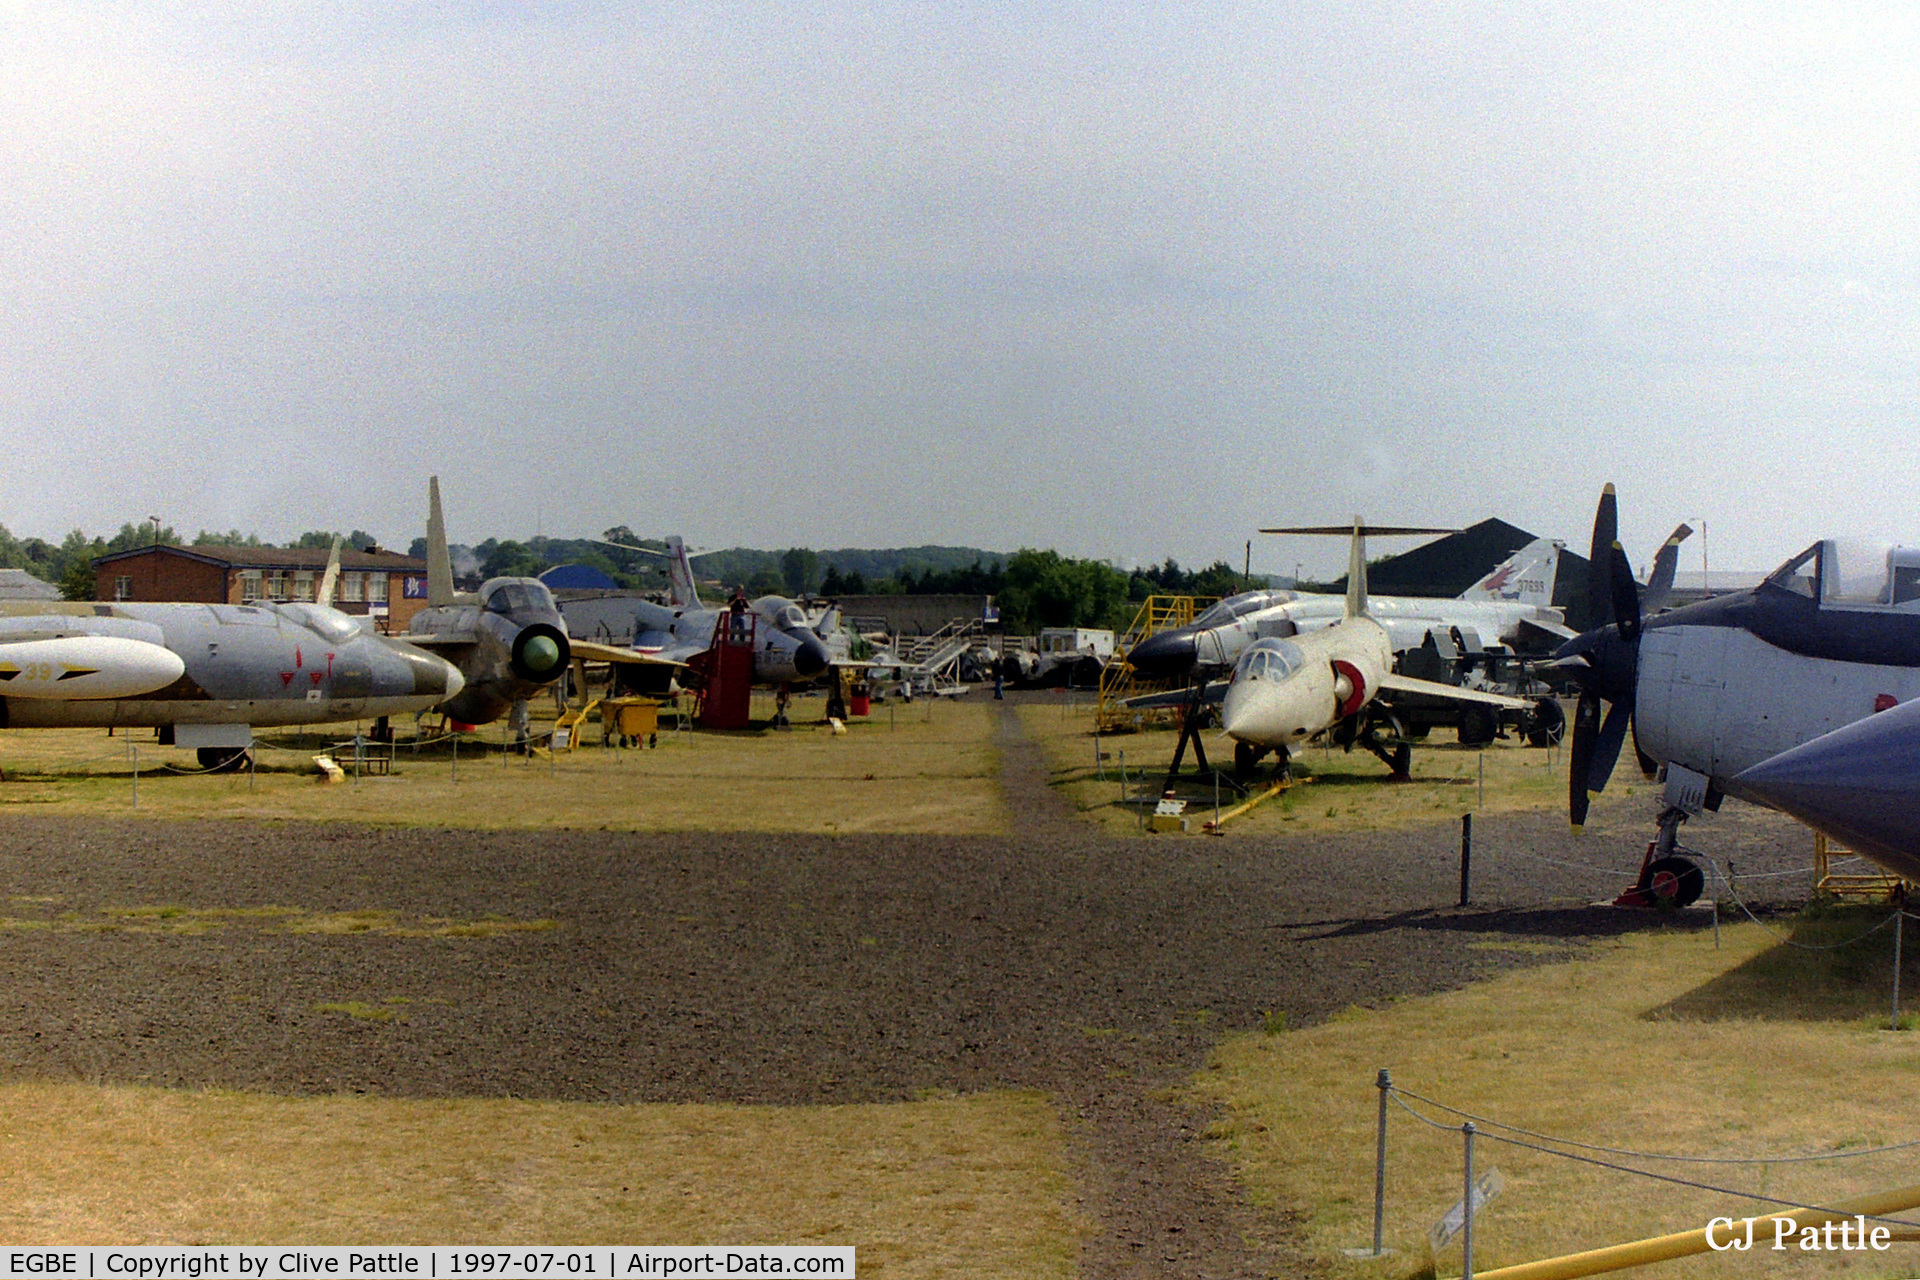 Coventry Airport, Coventry, England United Kingdom (EGBE) - A general view of some of the exhibits at the Midland Air Museum, Coventry Airport. Photo taken in 1997.